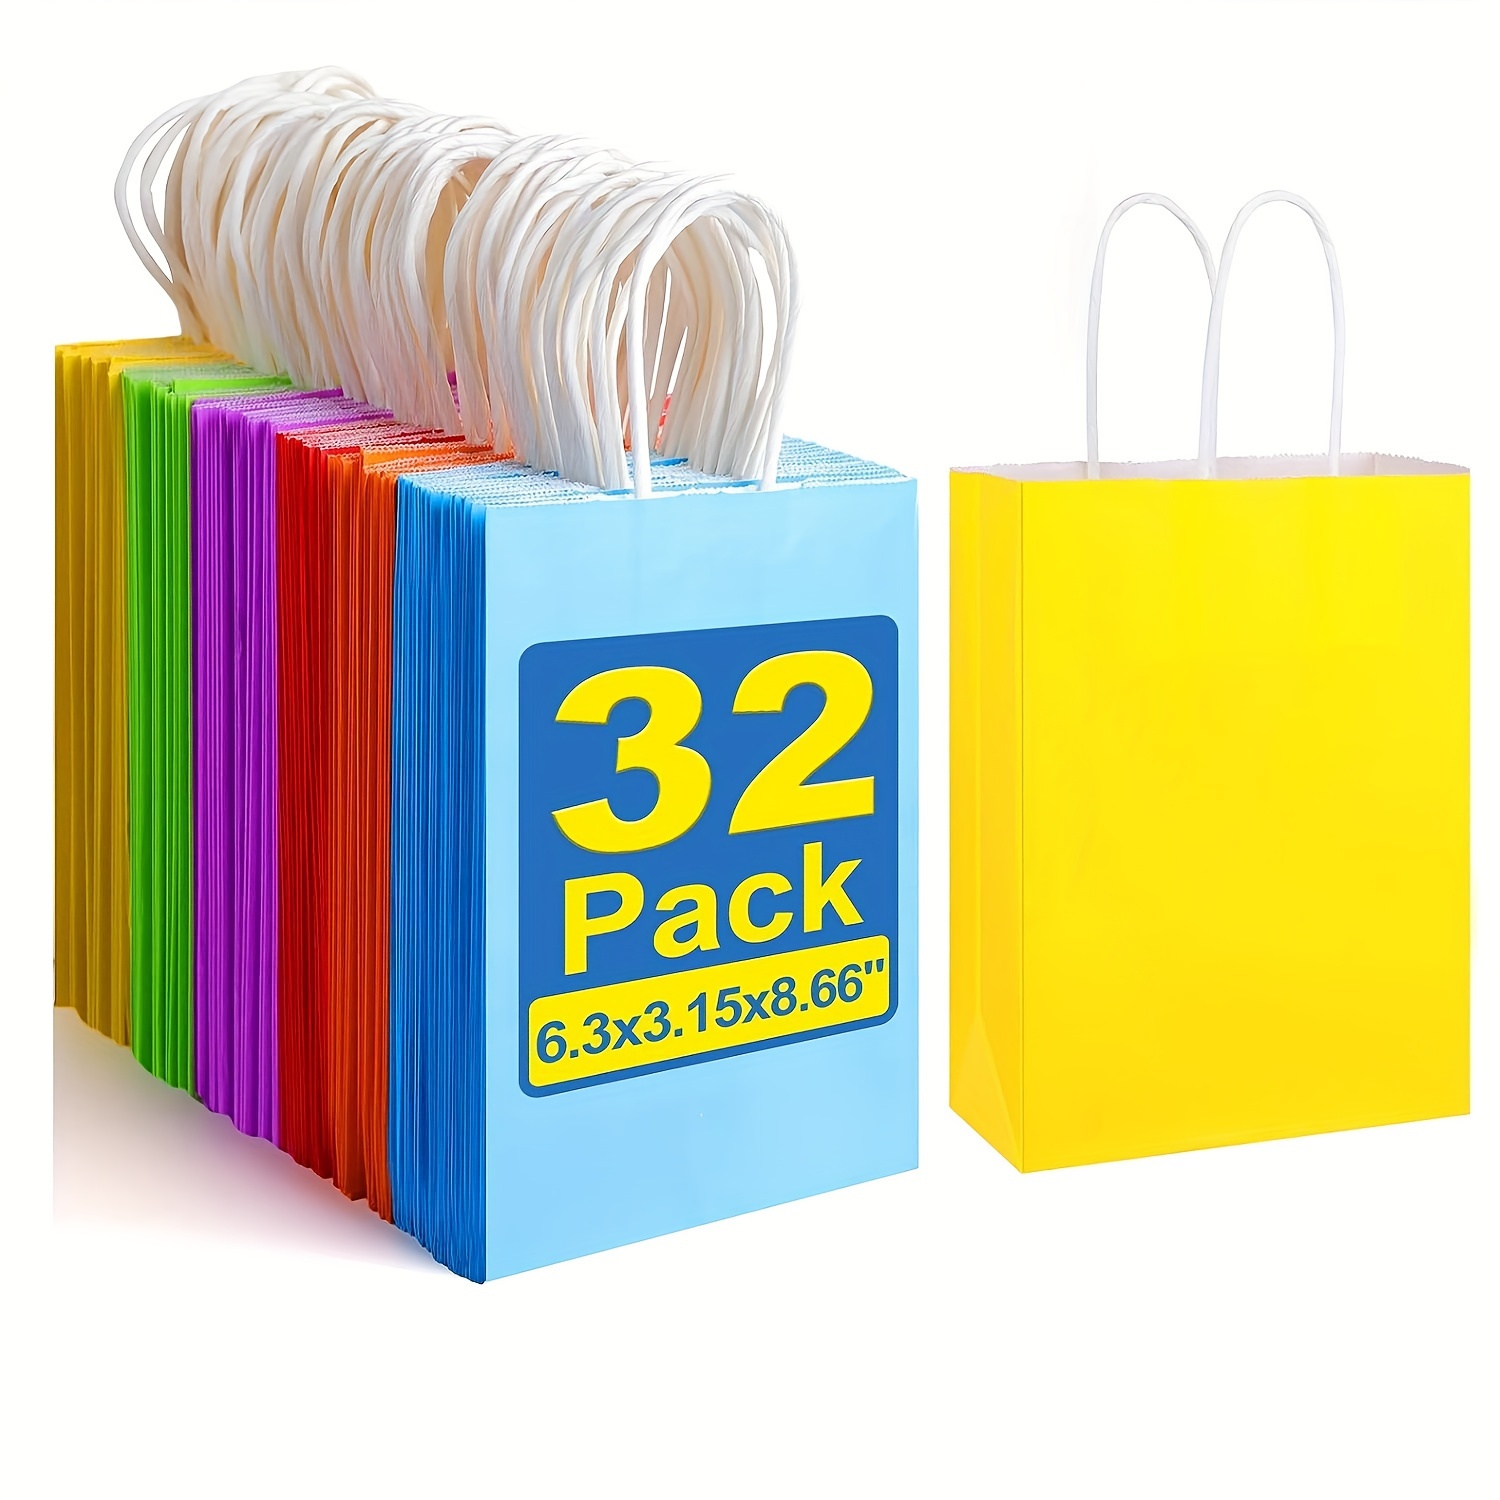 

32pcs Paper Gift Bags, Kraft Paper Party Favor Bags Bulk With Handles For Birthday, Shower, Crafts, Wedding, Party Supplies (6 Colors)